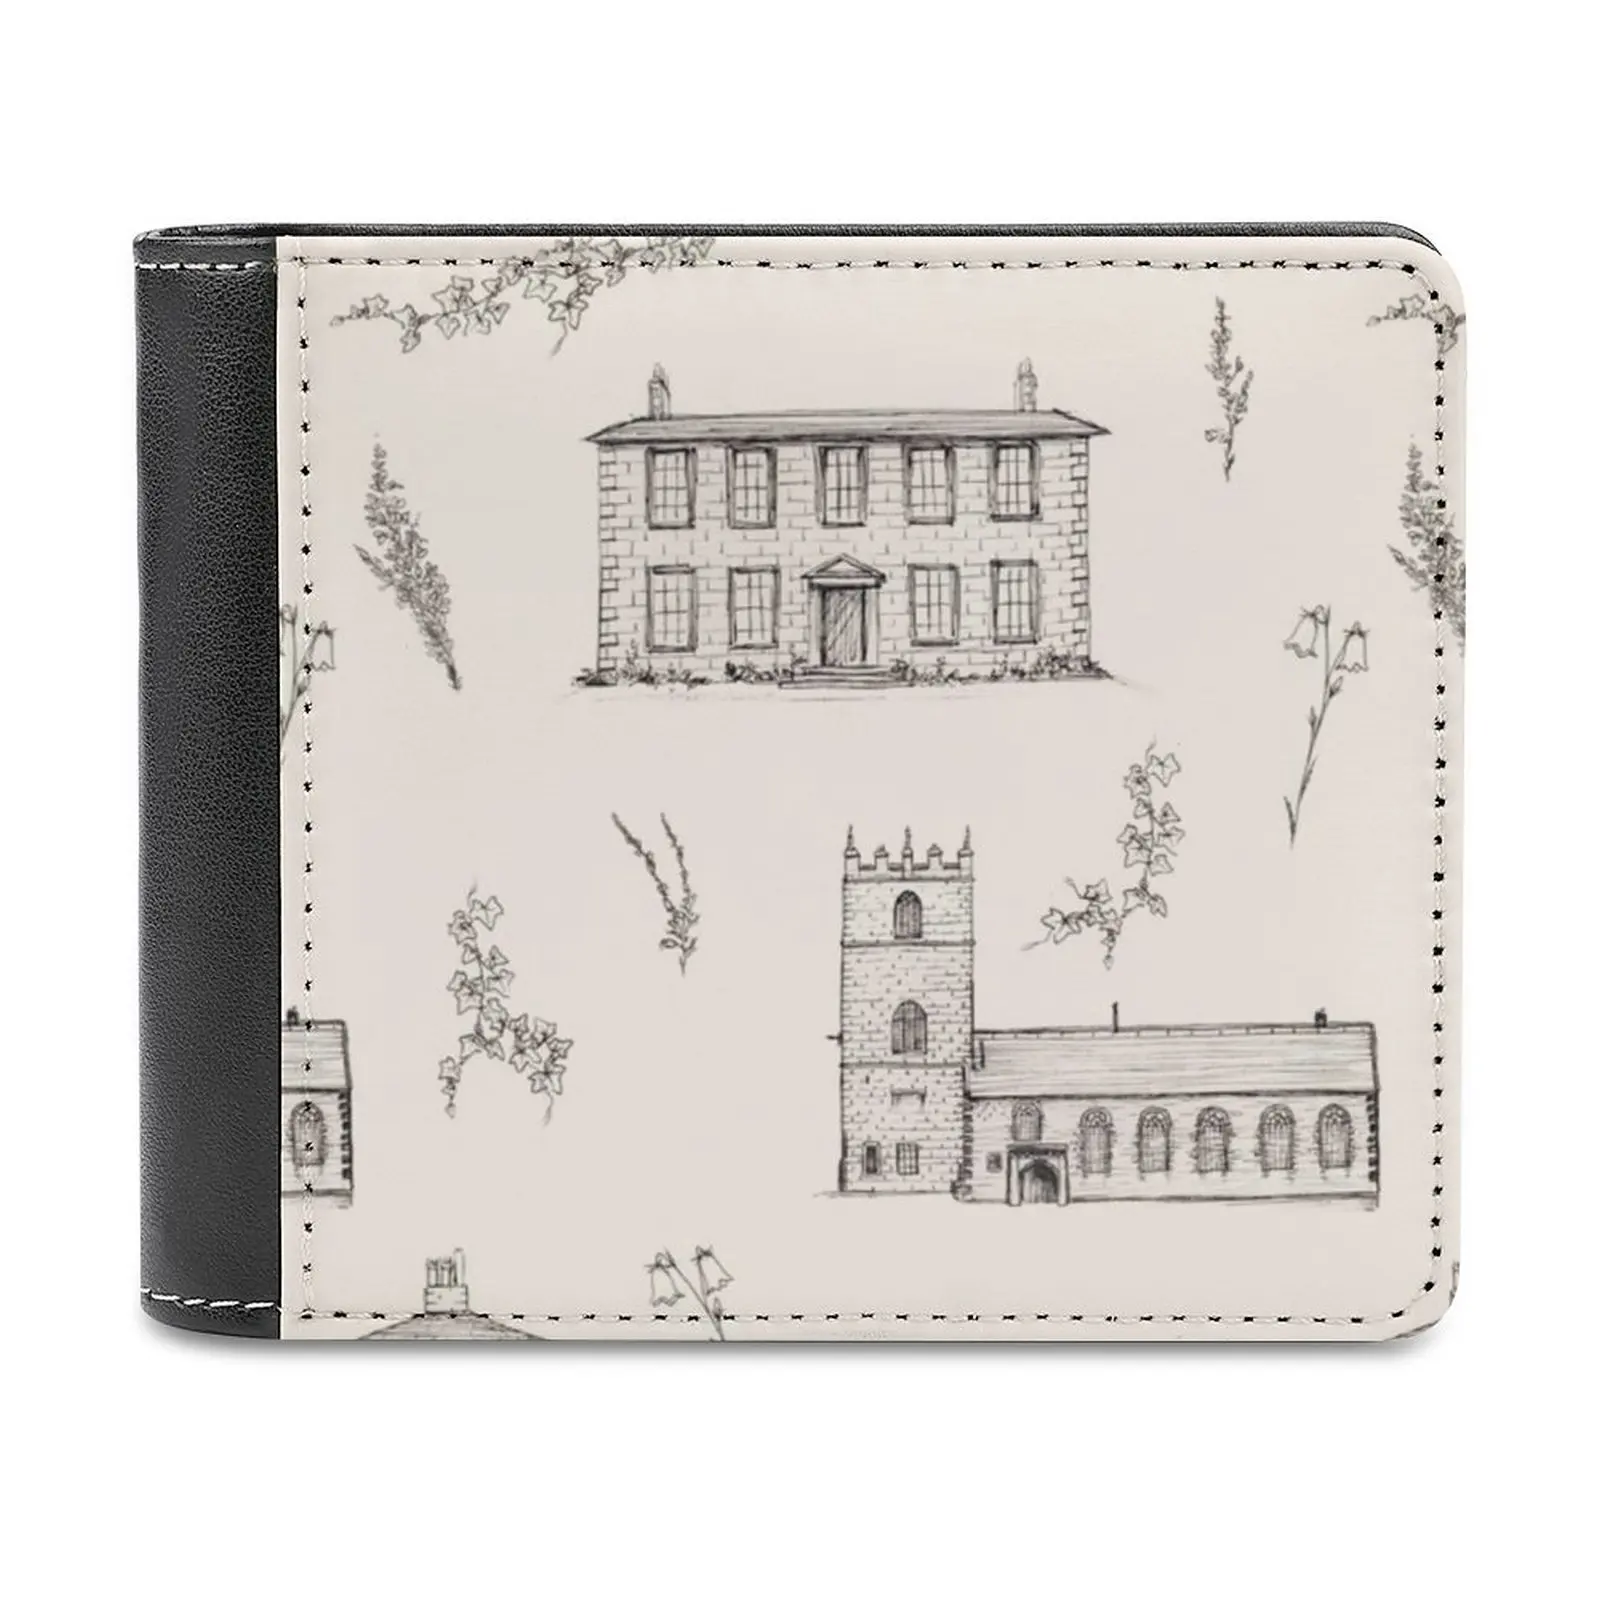 

Bronte Parsonage 'Among The Heath And Harebells' Men's Wallet Purses Wallets New Design Dollar Price Top Men Leather Wallet